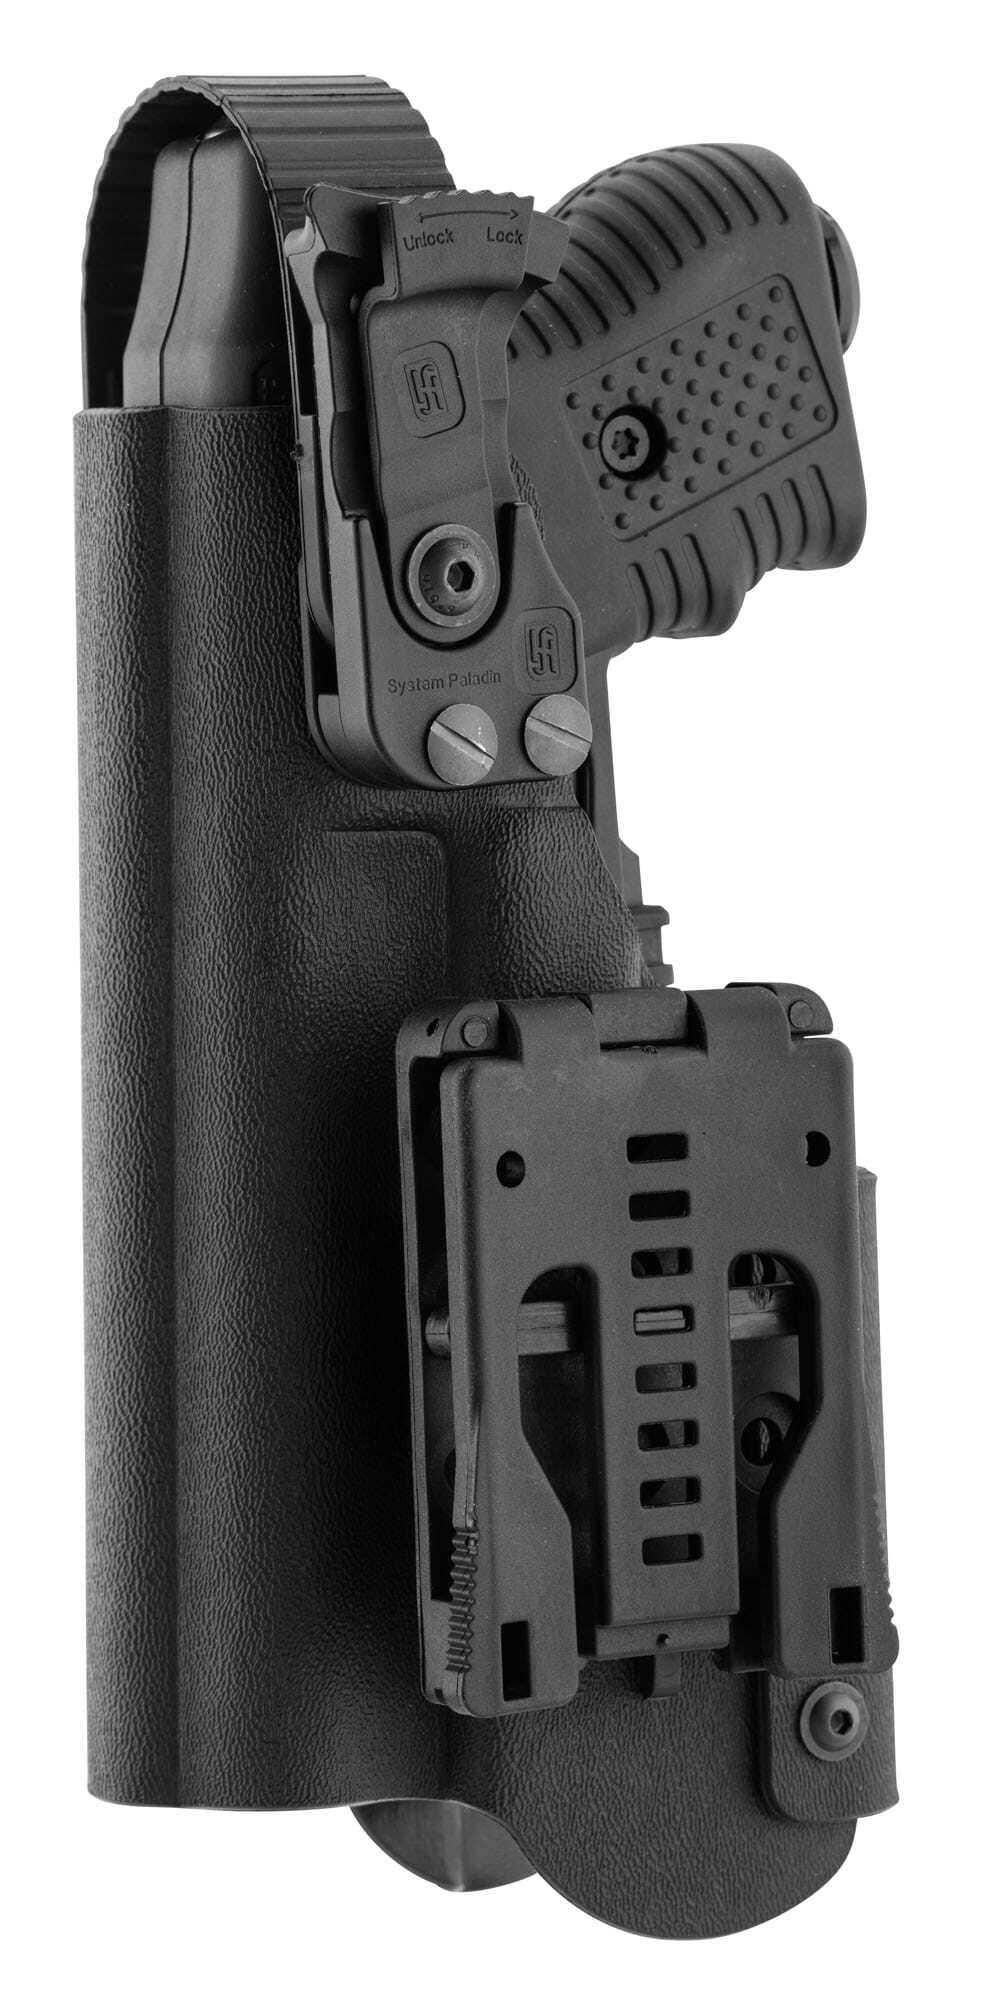 JPX390-1-Holster pour JPX - Kydex Paladin II avec lampe tactique - JPX390